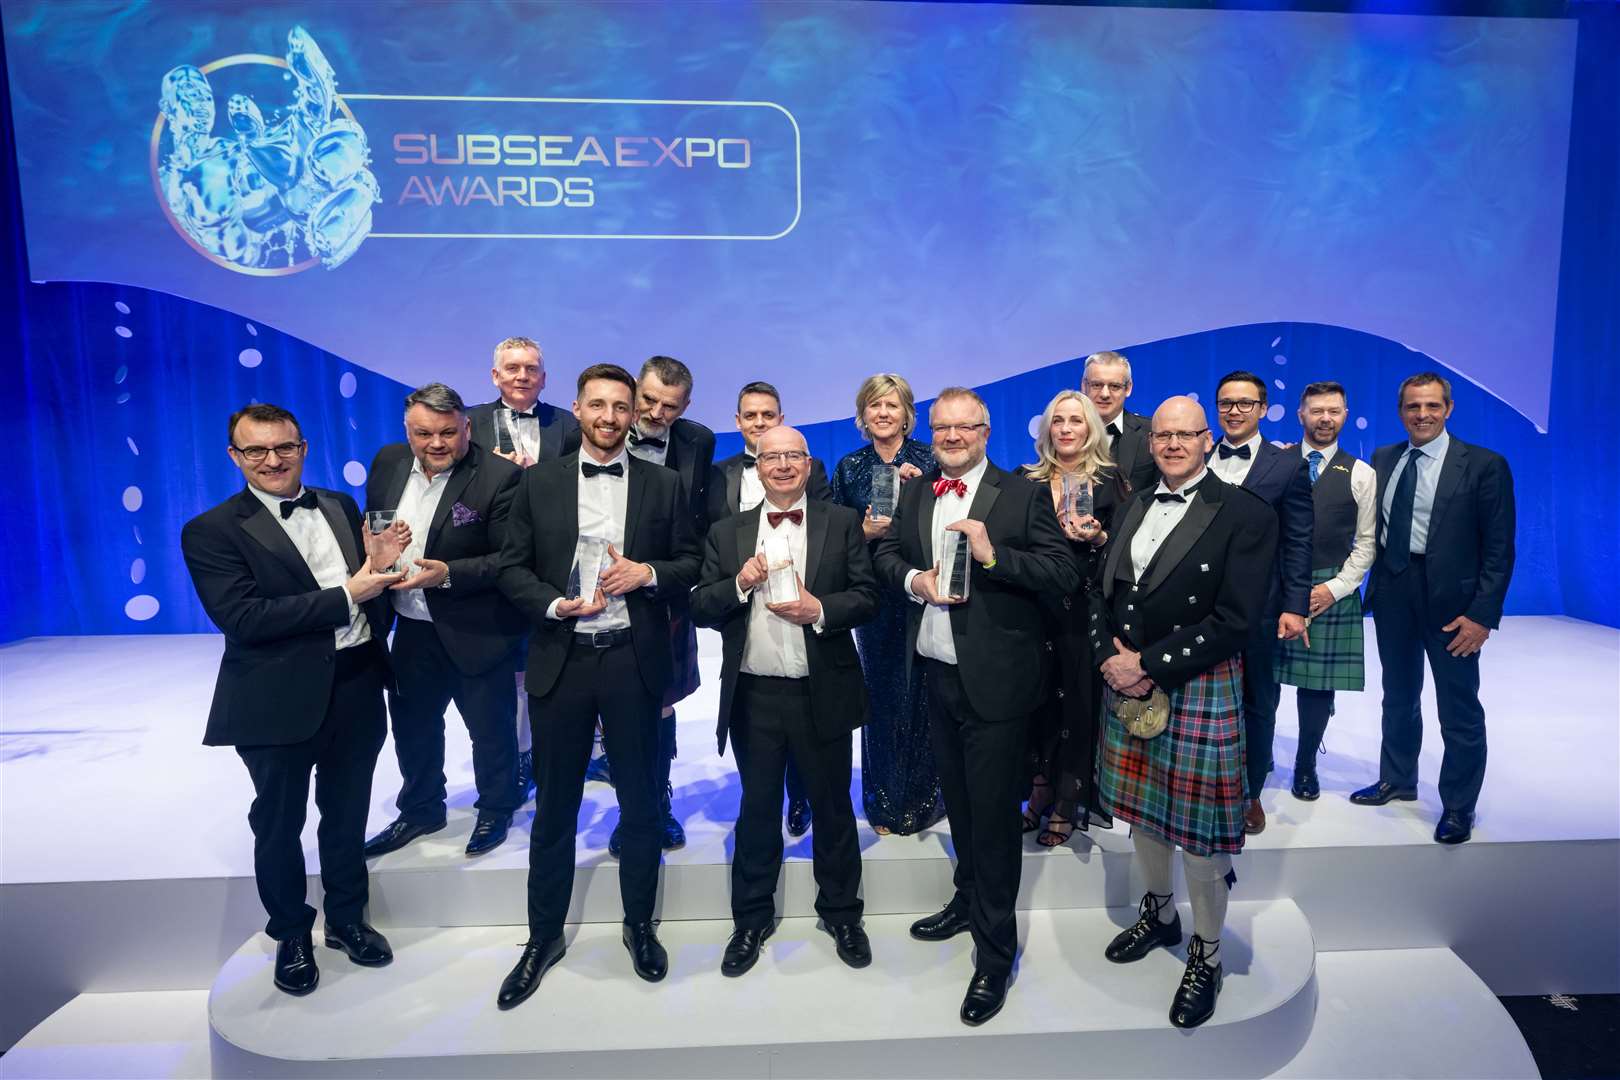 The winners in the Subsea Expo Awards which were held in Aberdeen.